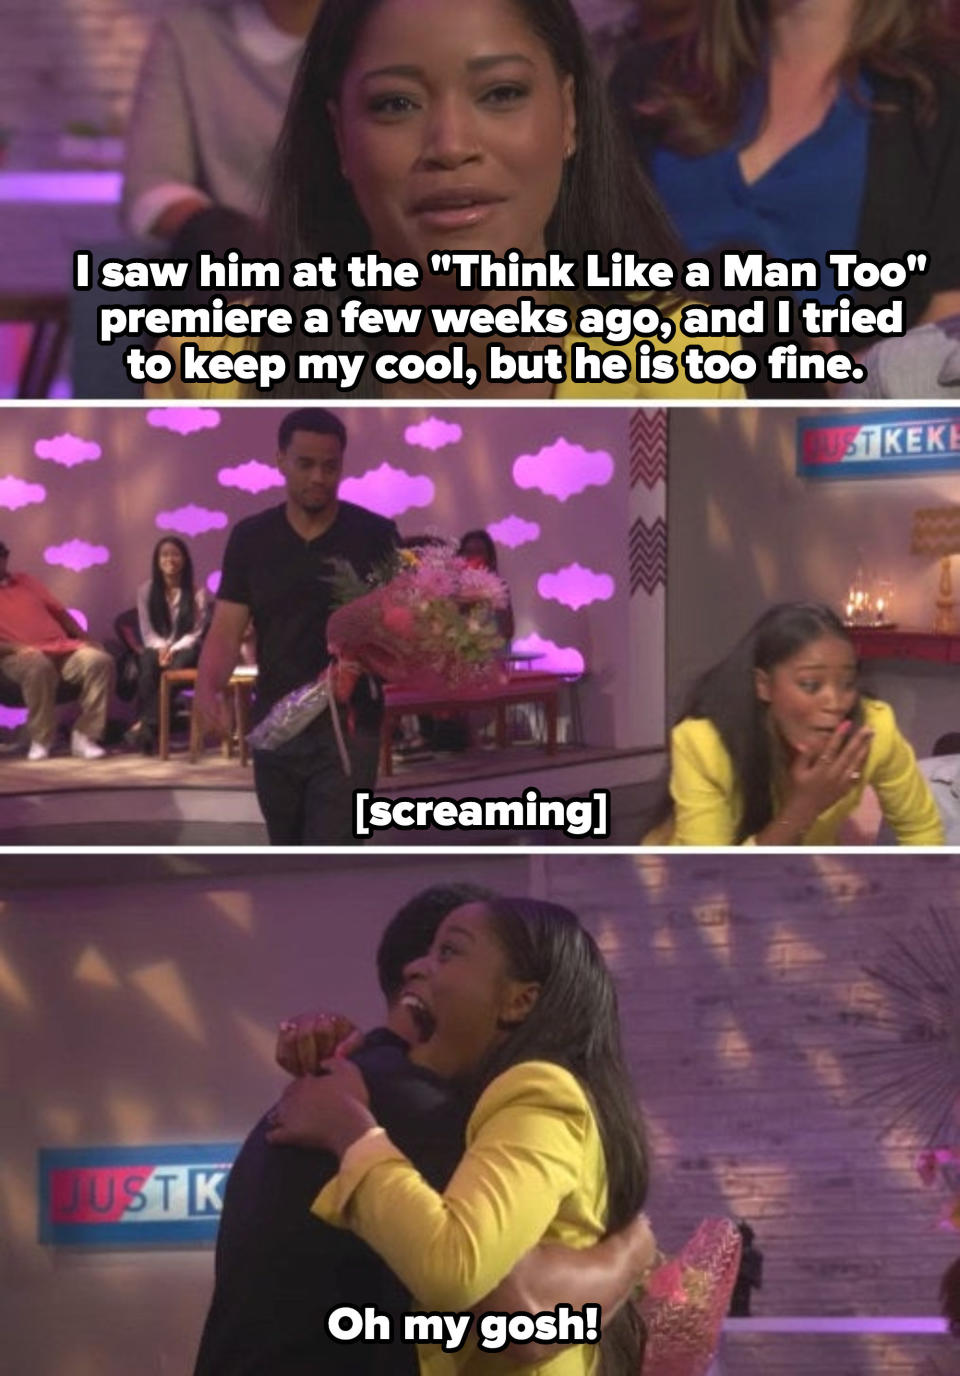 Keke says, "I saw him at the 'Think Like a Man Too' premiere a few weeks ago, and I tried to keep my cool, but he is too fine" and then screams when she sees Michael appearing with flowers from behind